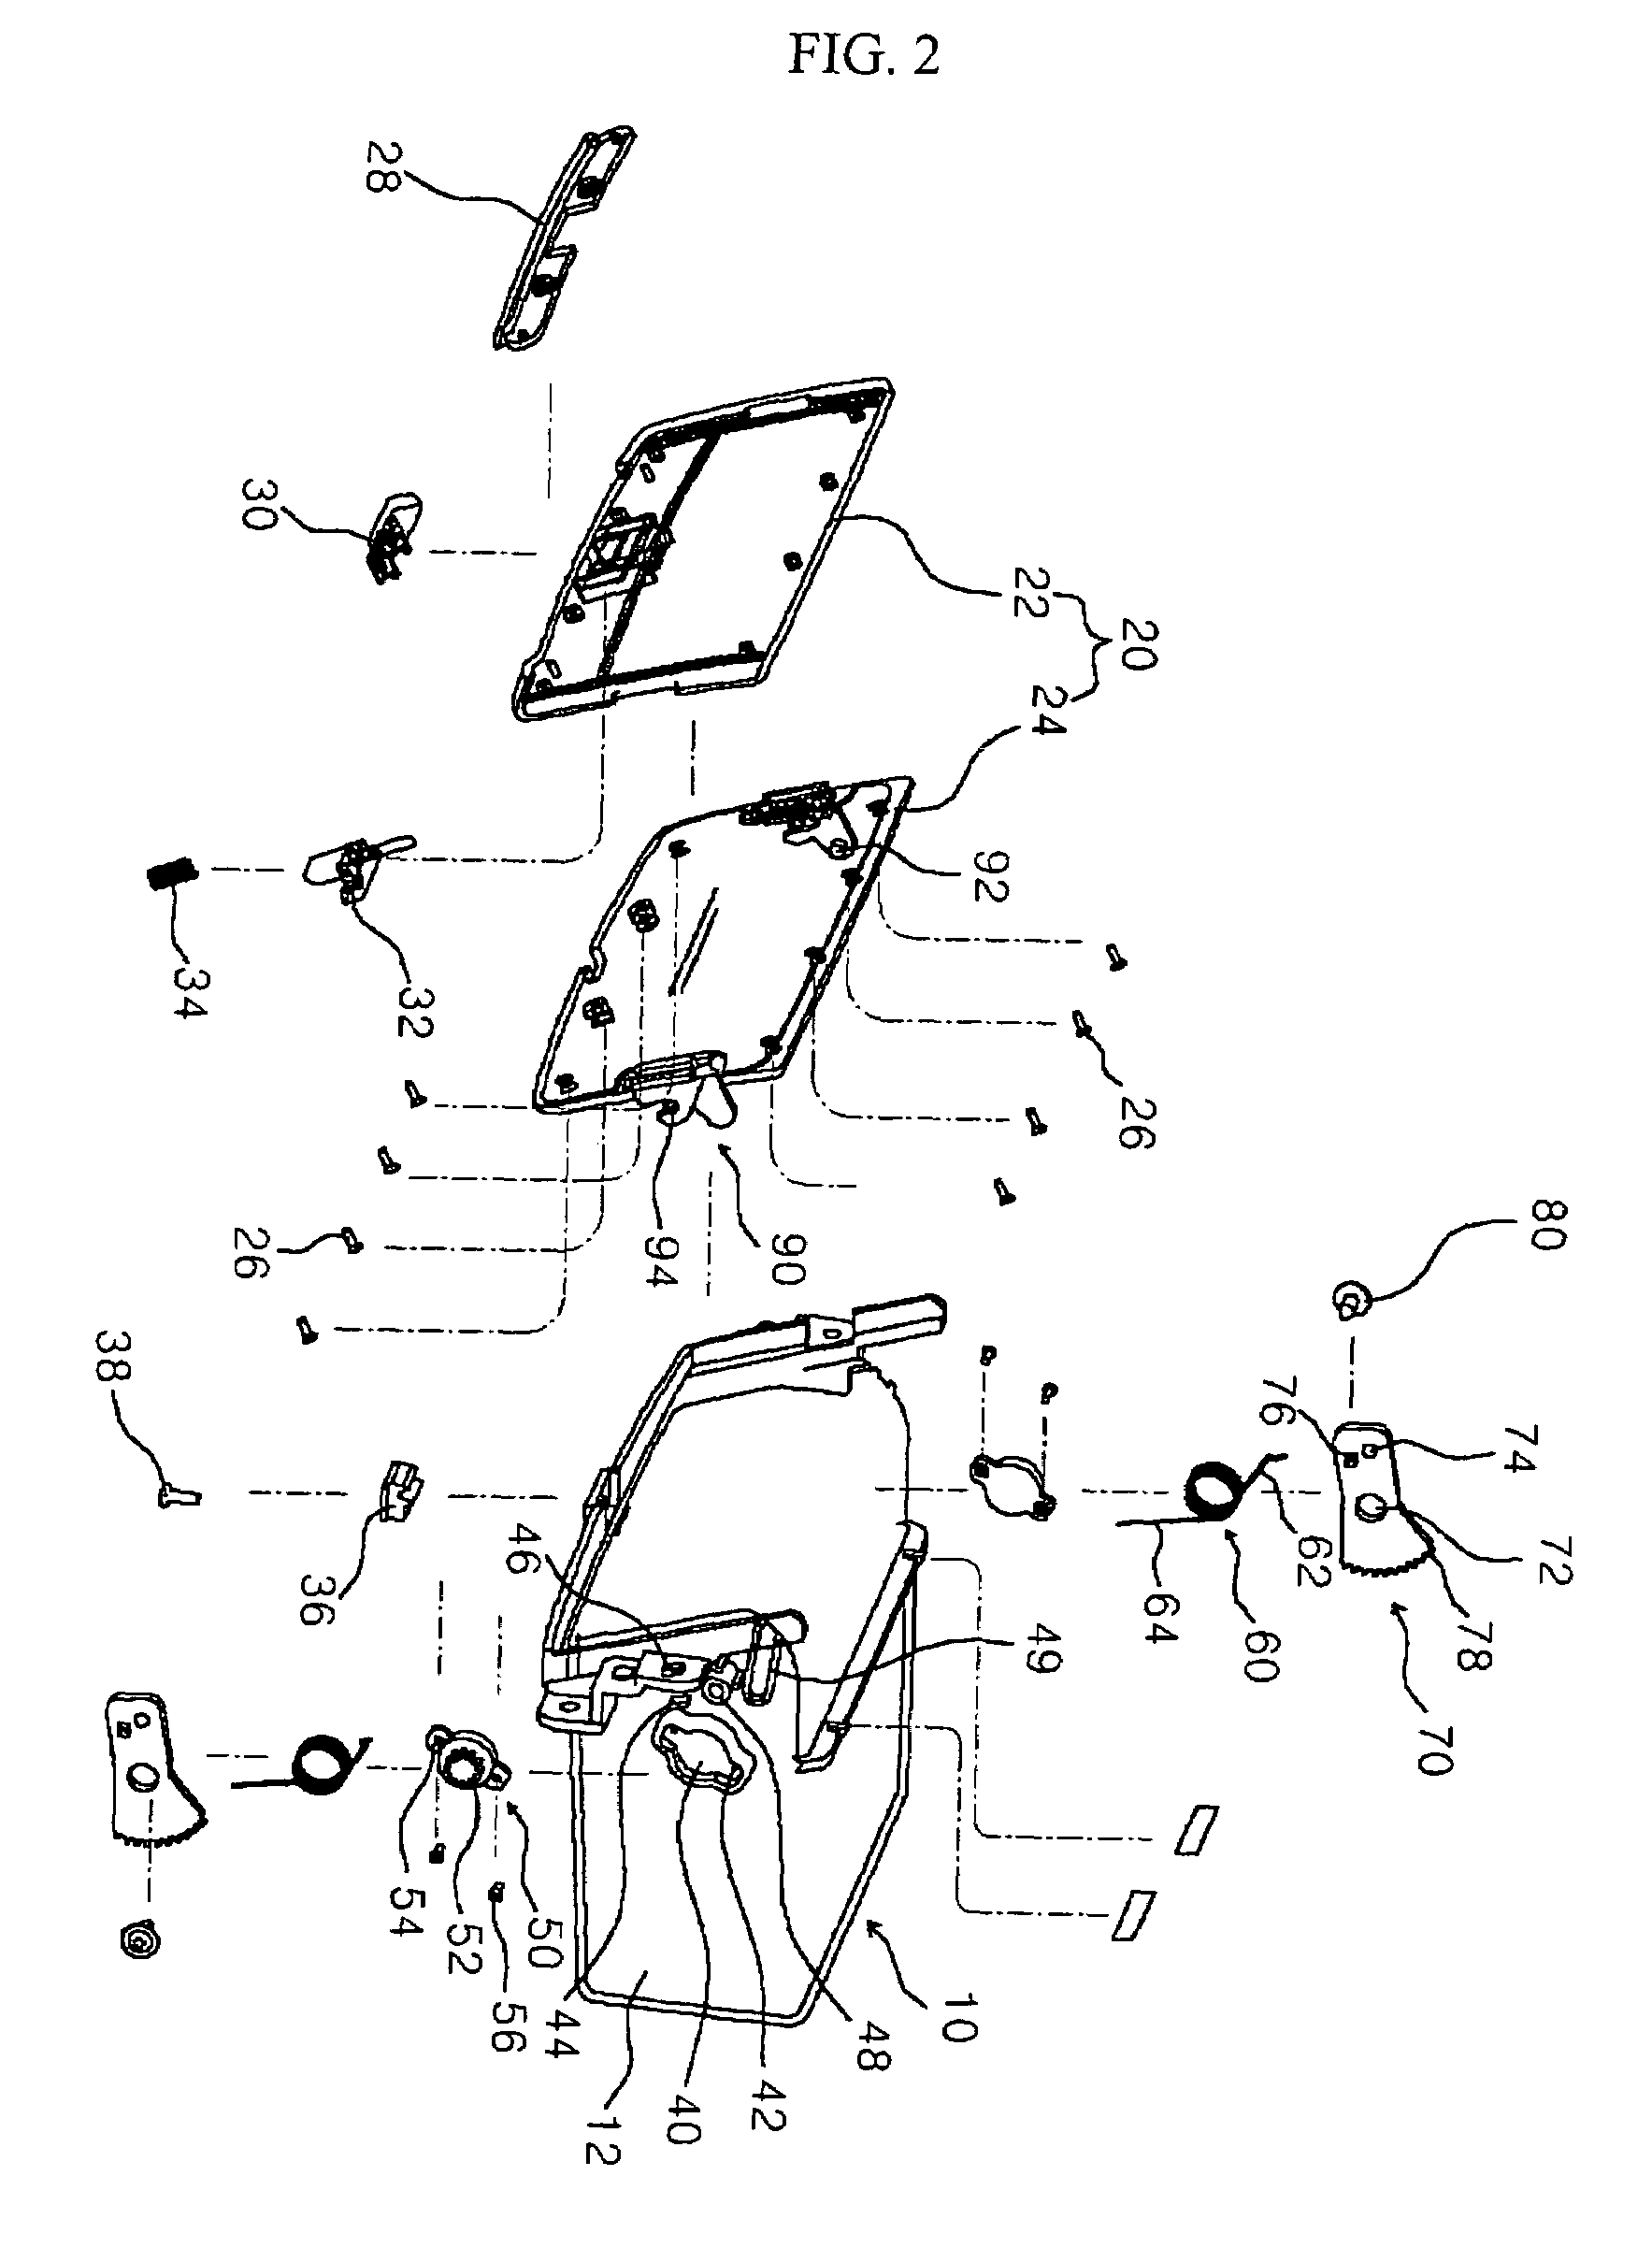 Open-type tray having a door configured to be received within an inner side thereof